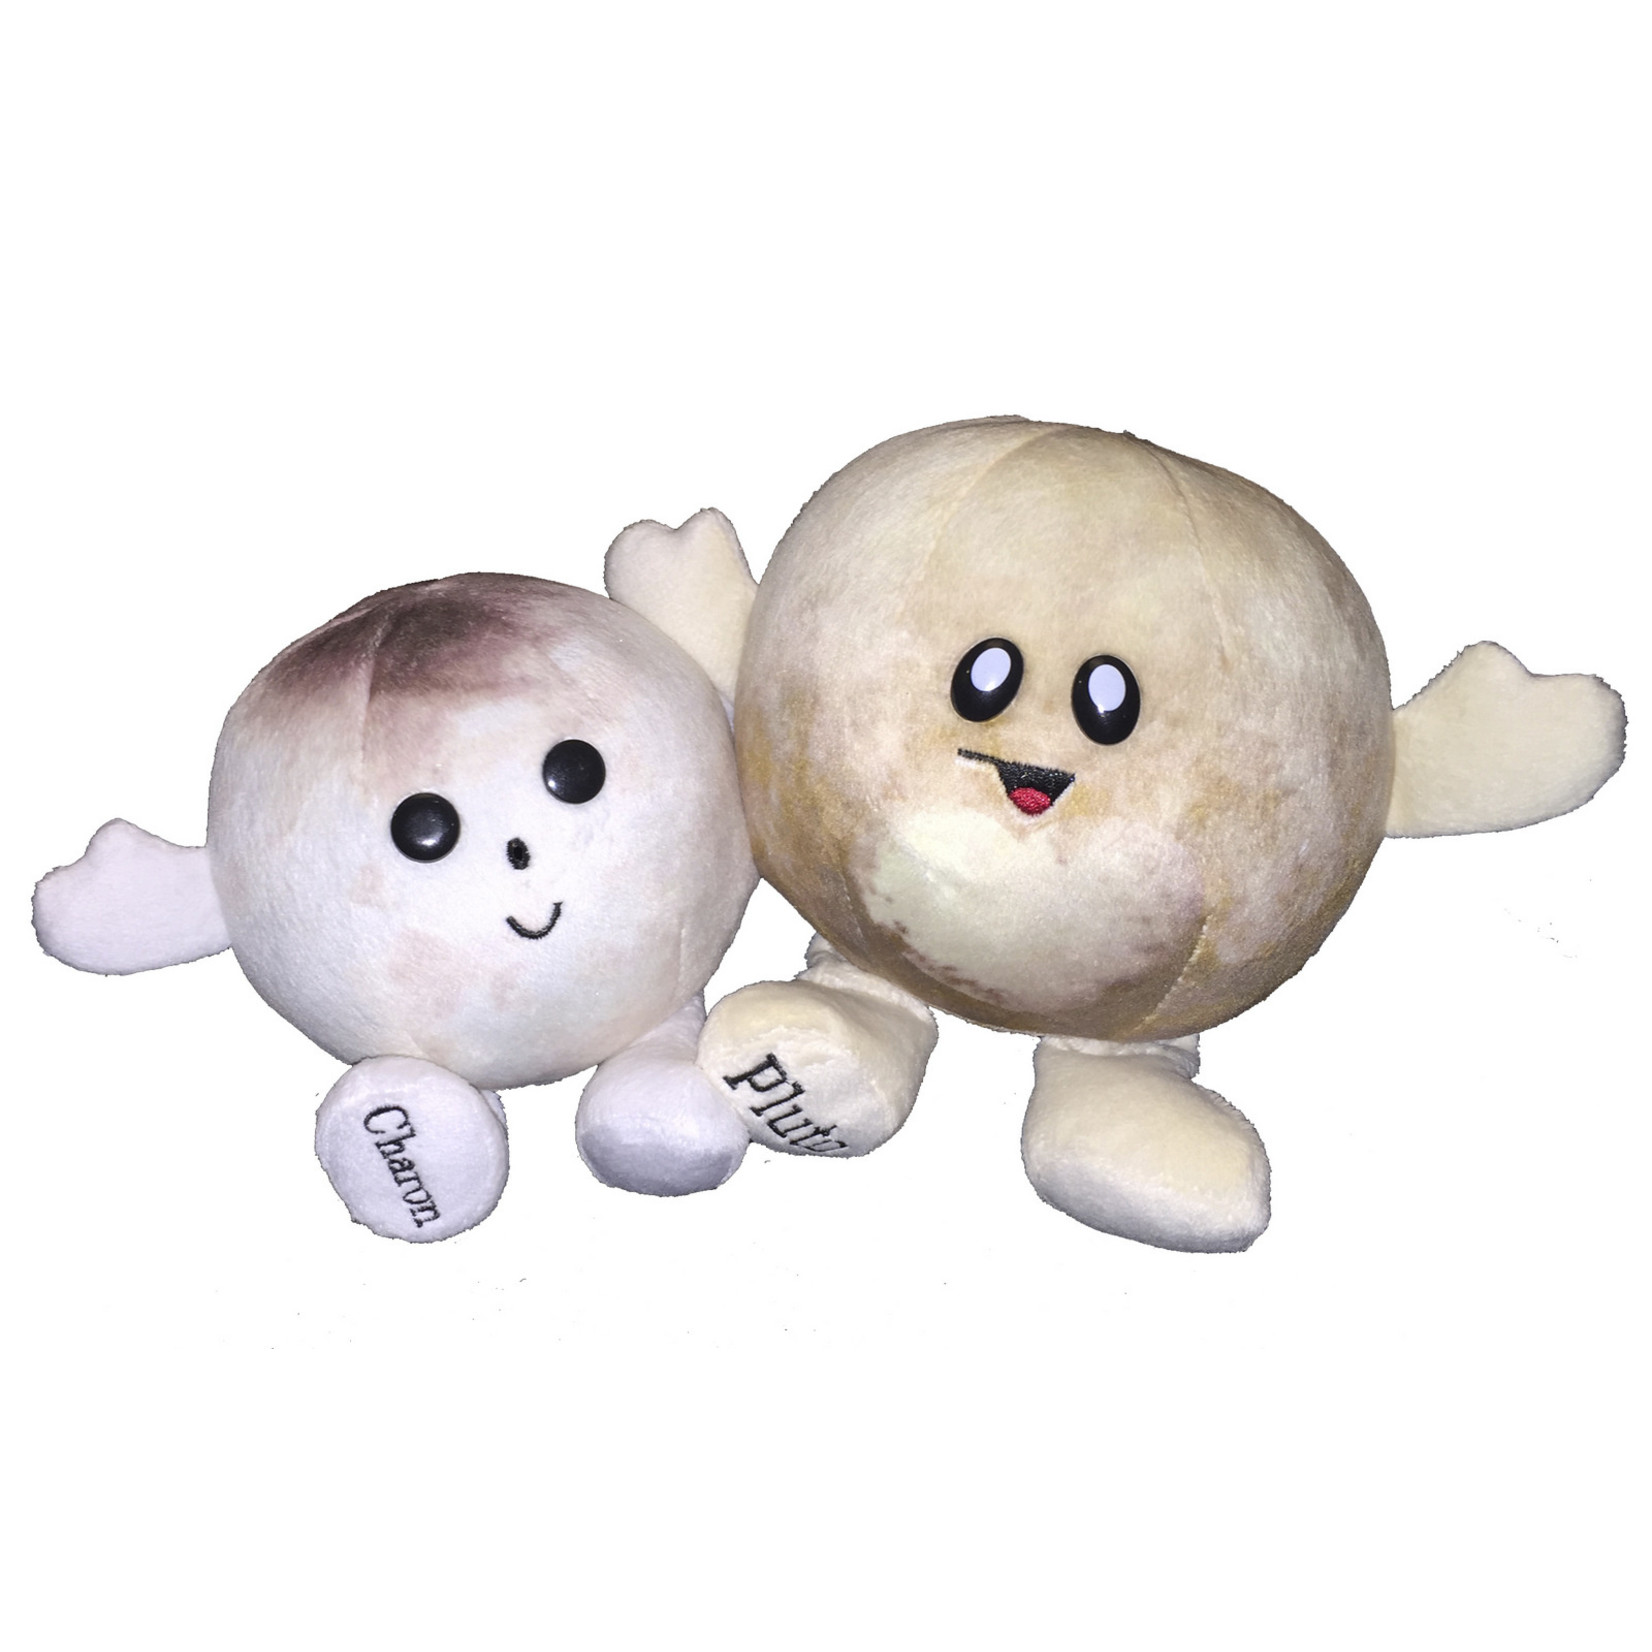 Aviation and Space Celestial Buddies™  Plush Pluto and Charon